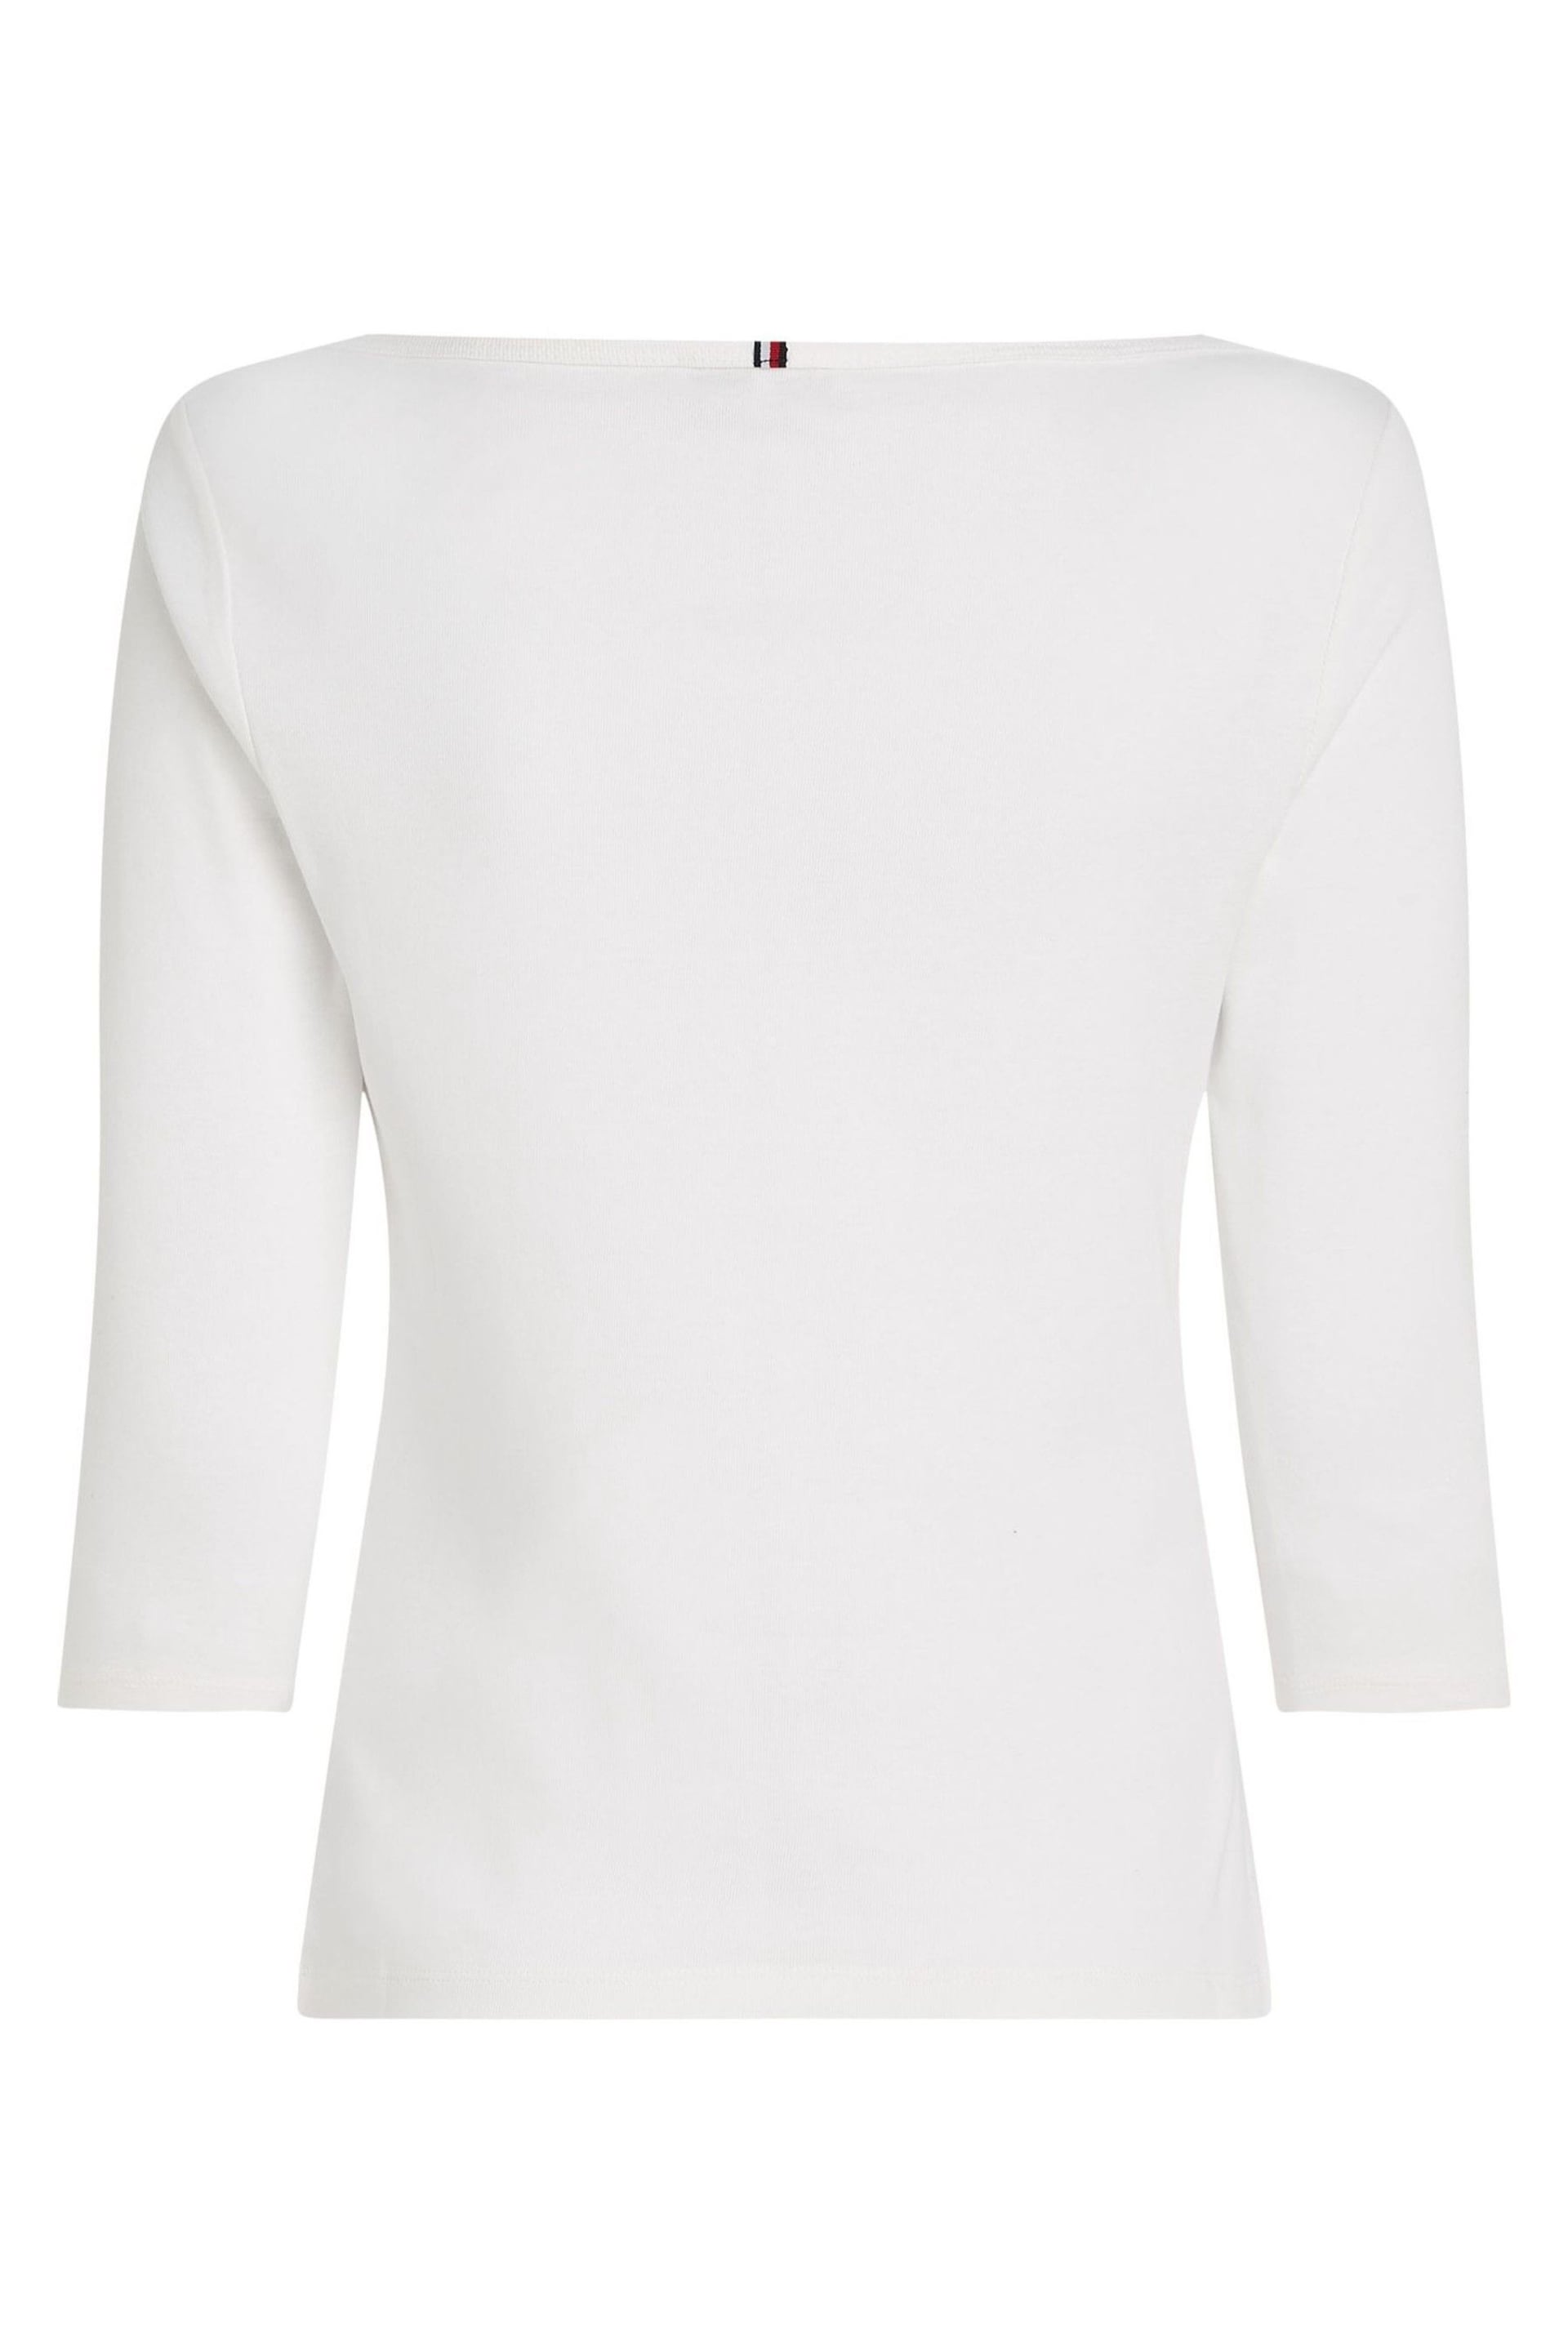 Tommy Hilfiger White Cody Slim Boat-Neck Top - Image 5 of 5